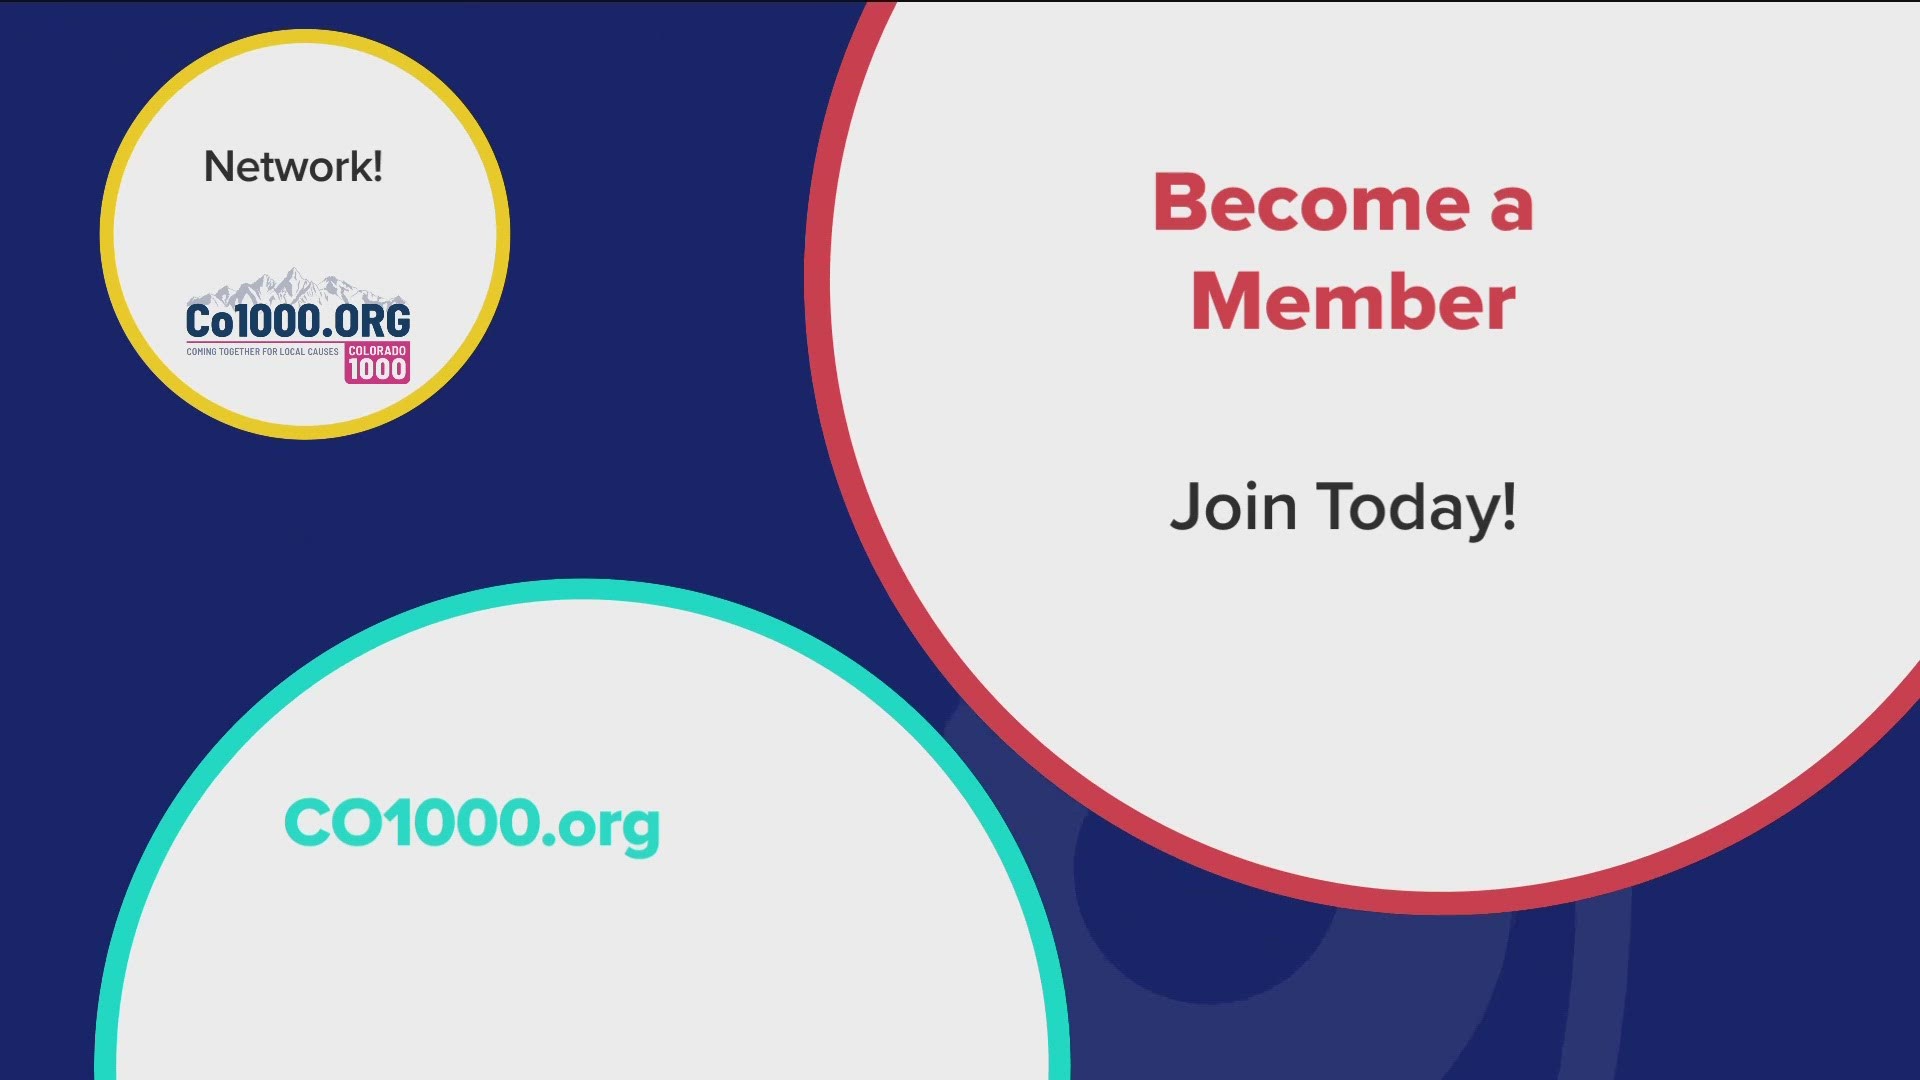 There's so much happening with CO1000! Find all the upcoming events and become a member at CO1000.org.